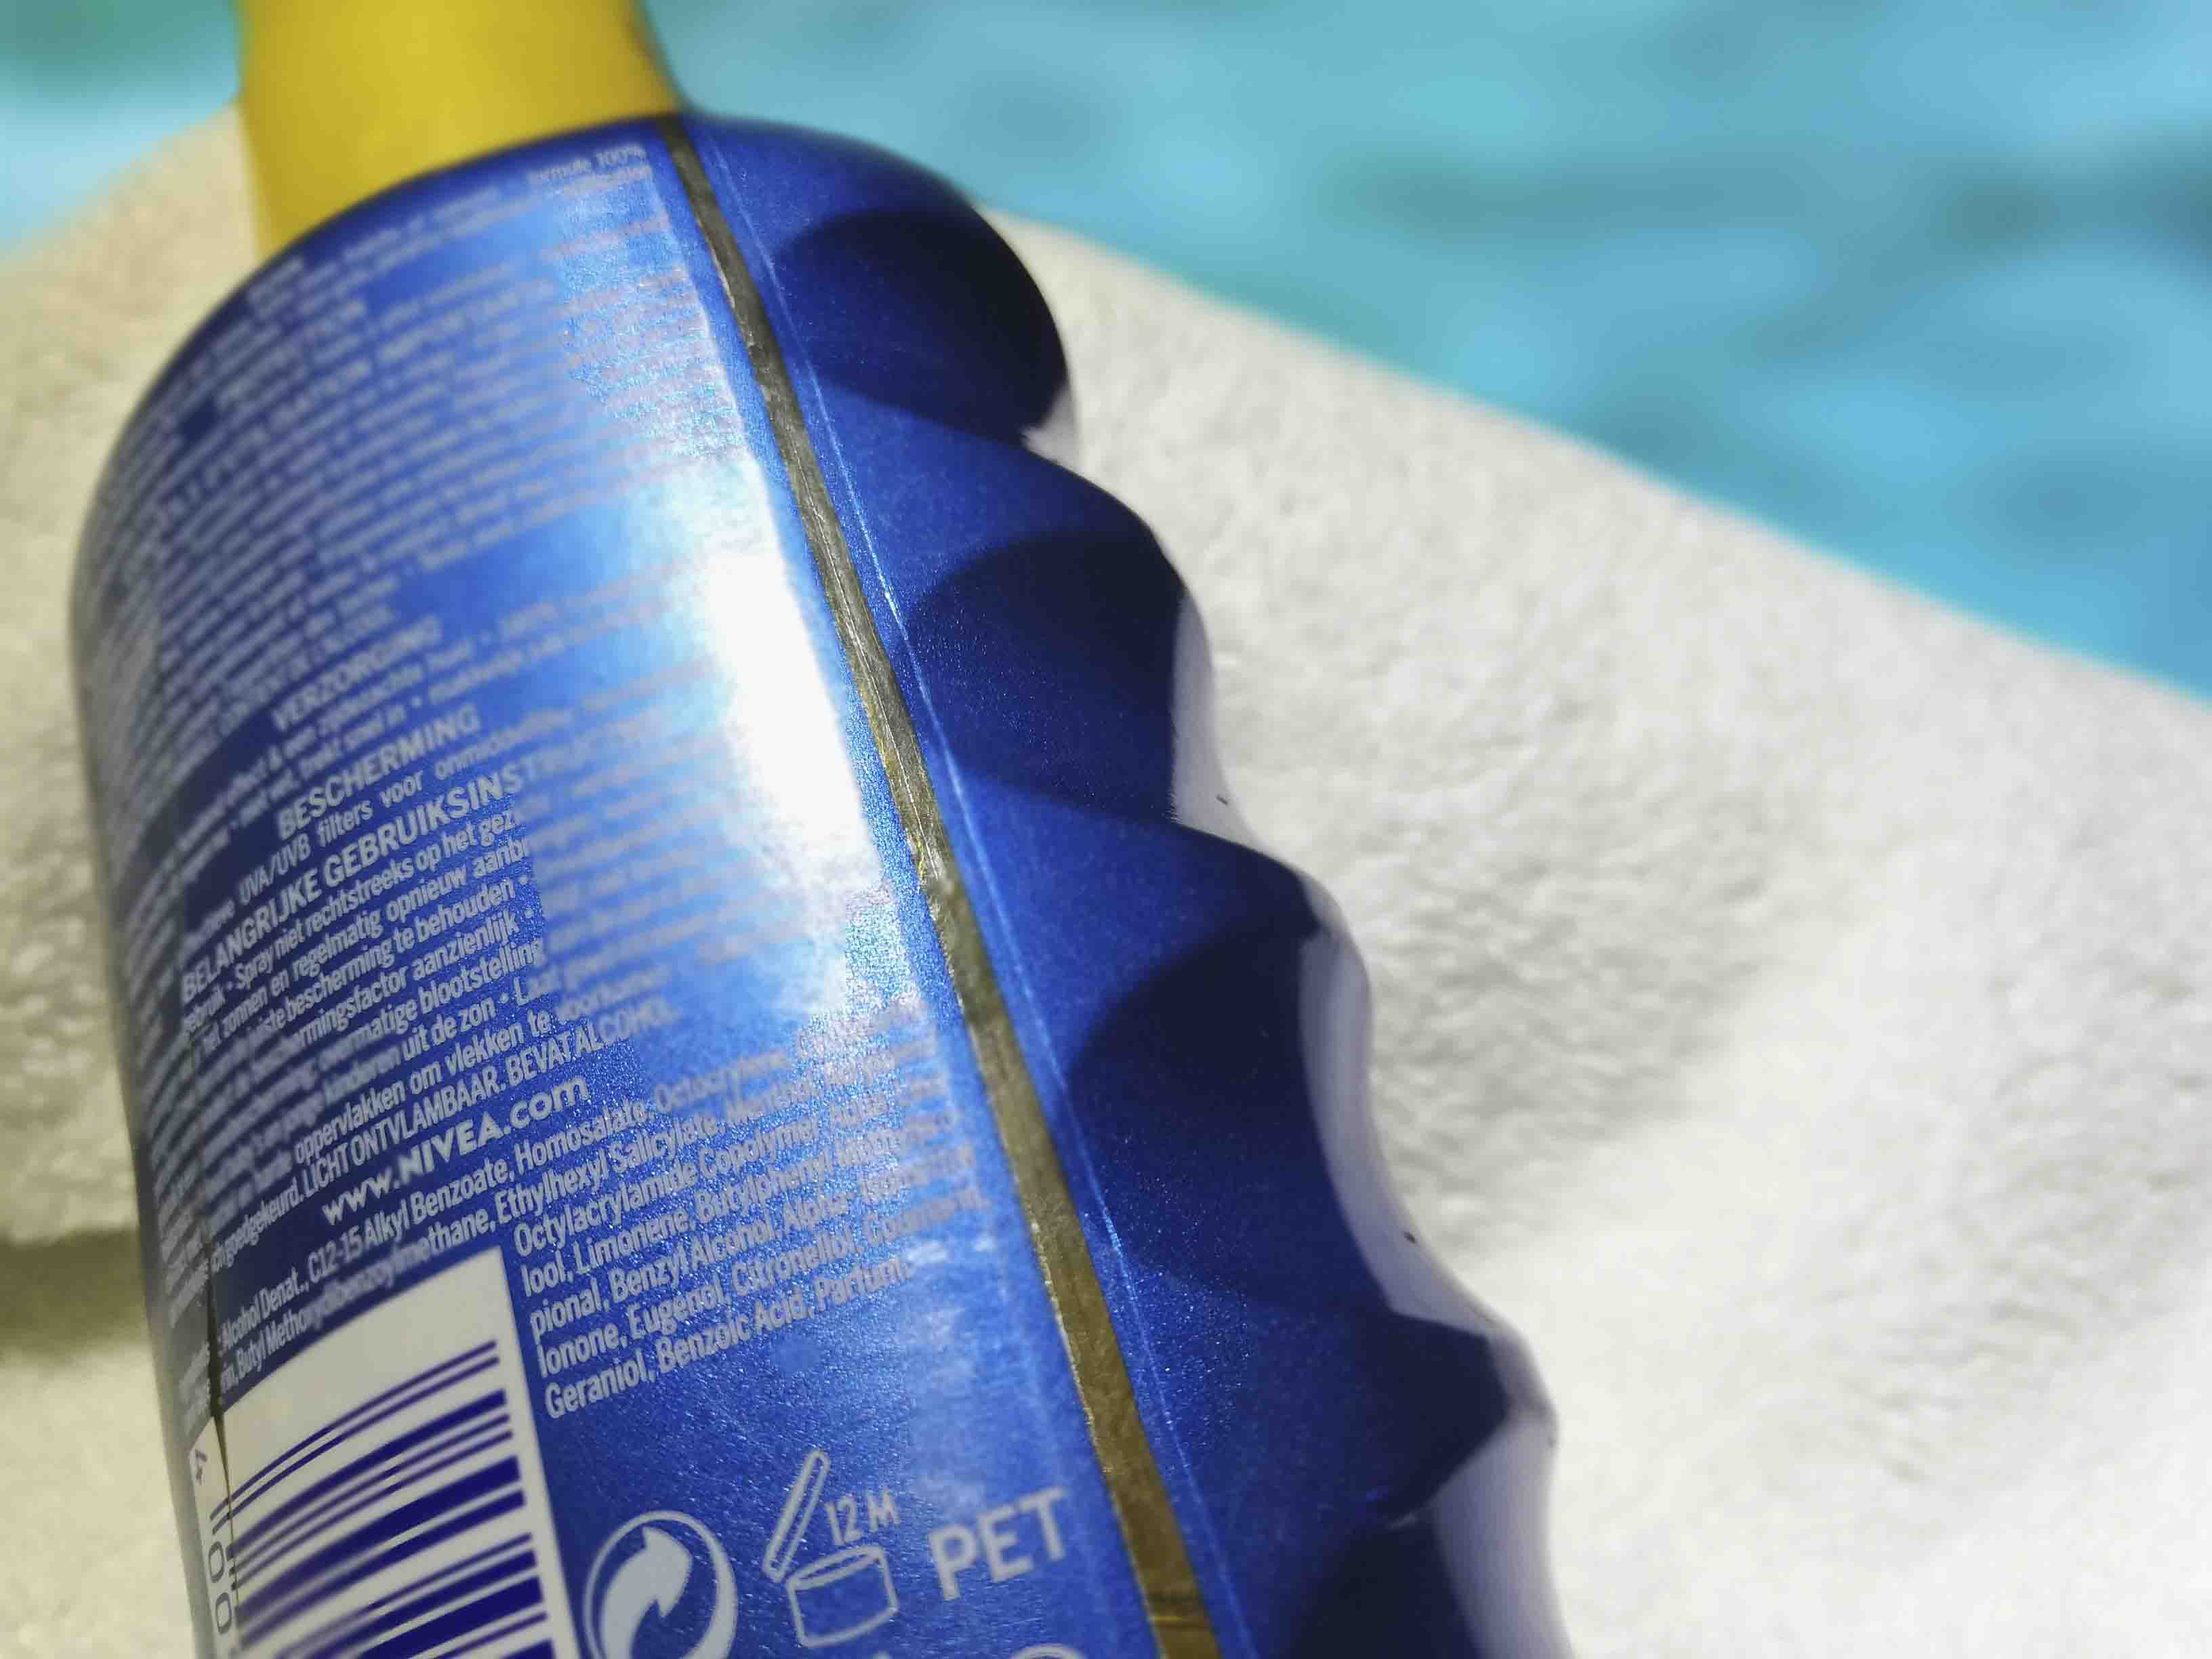 Sunscreens are composed of several chemical UV filters. Of these oxybenzone is the main ingredient of concern.